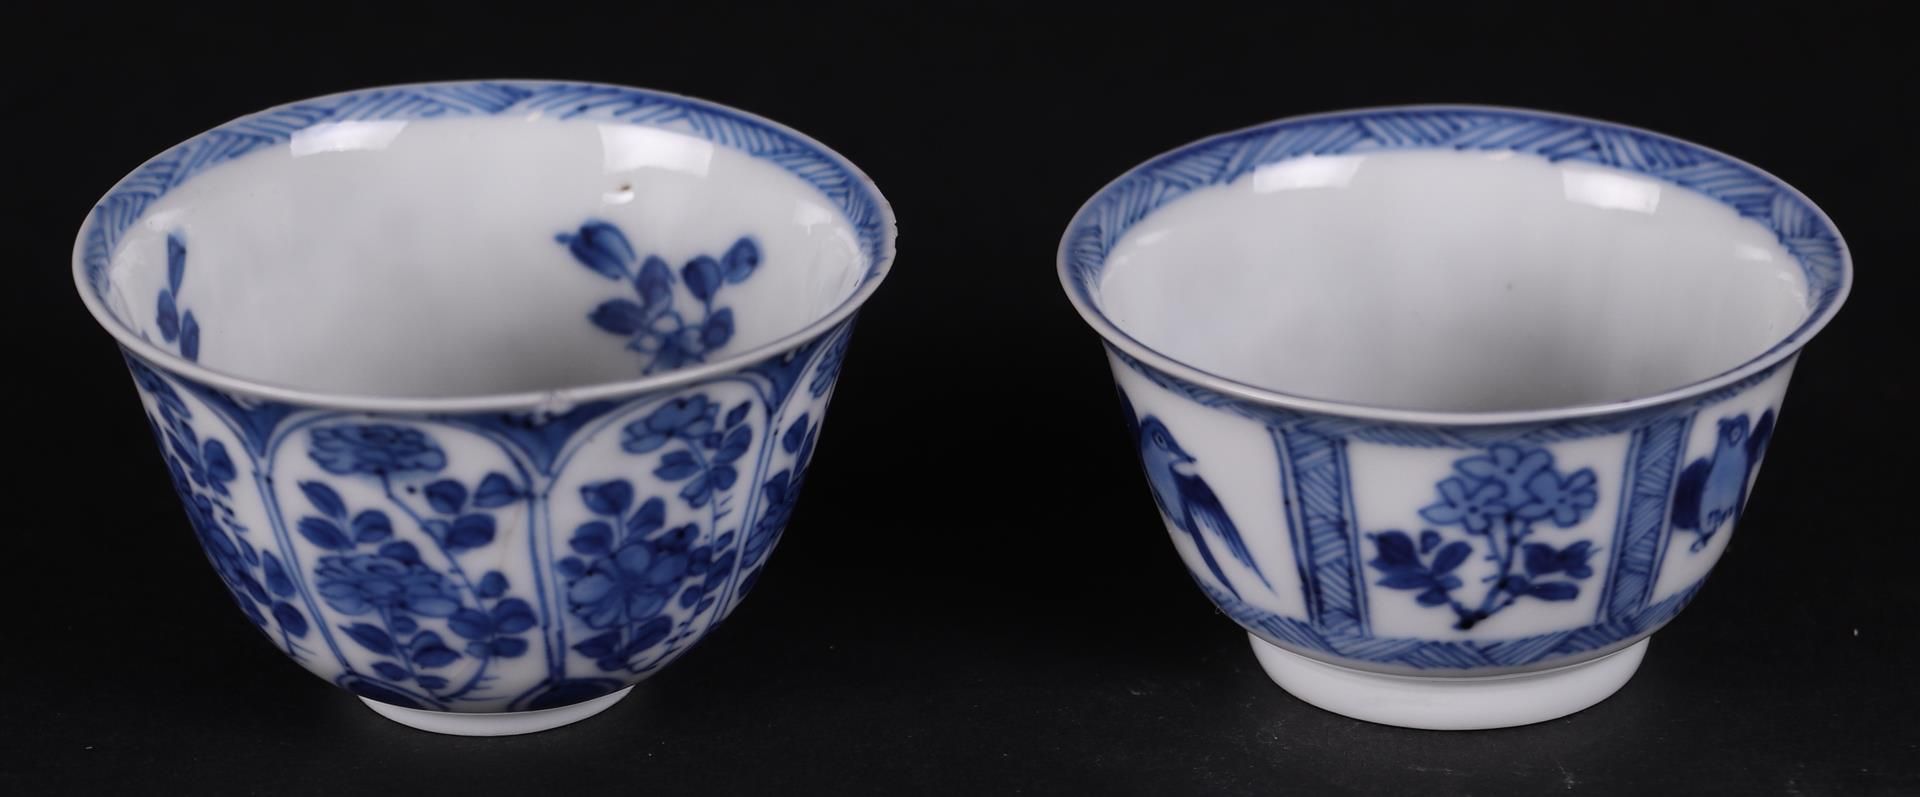 Two various porcelain bowls, both with flower beds decoration, one with bird decoration. - Image 3 of 3